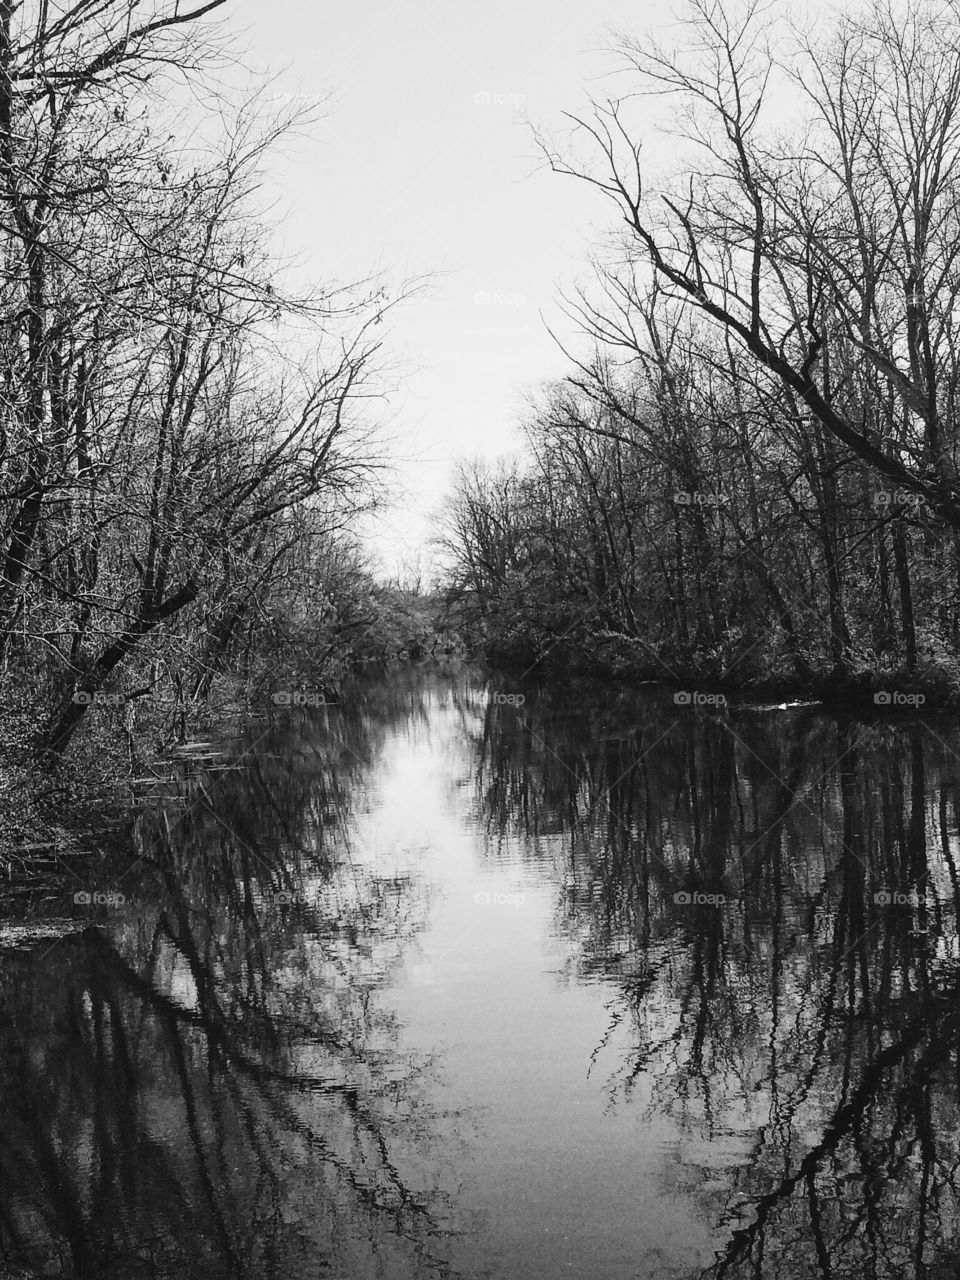 Body of water reflecting surrounding trees in black and white